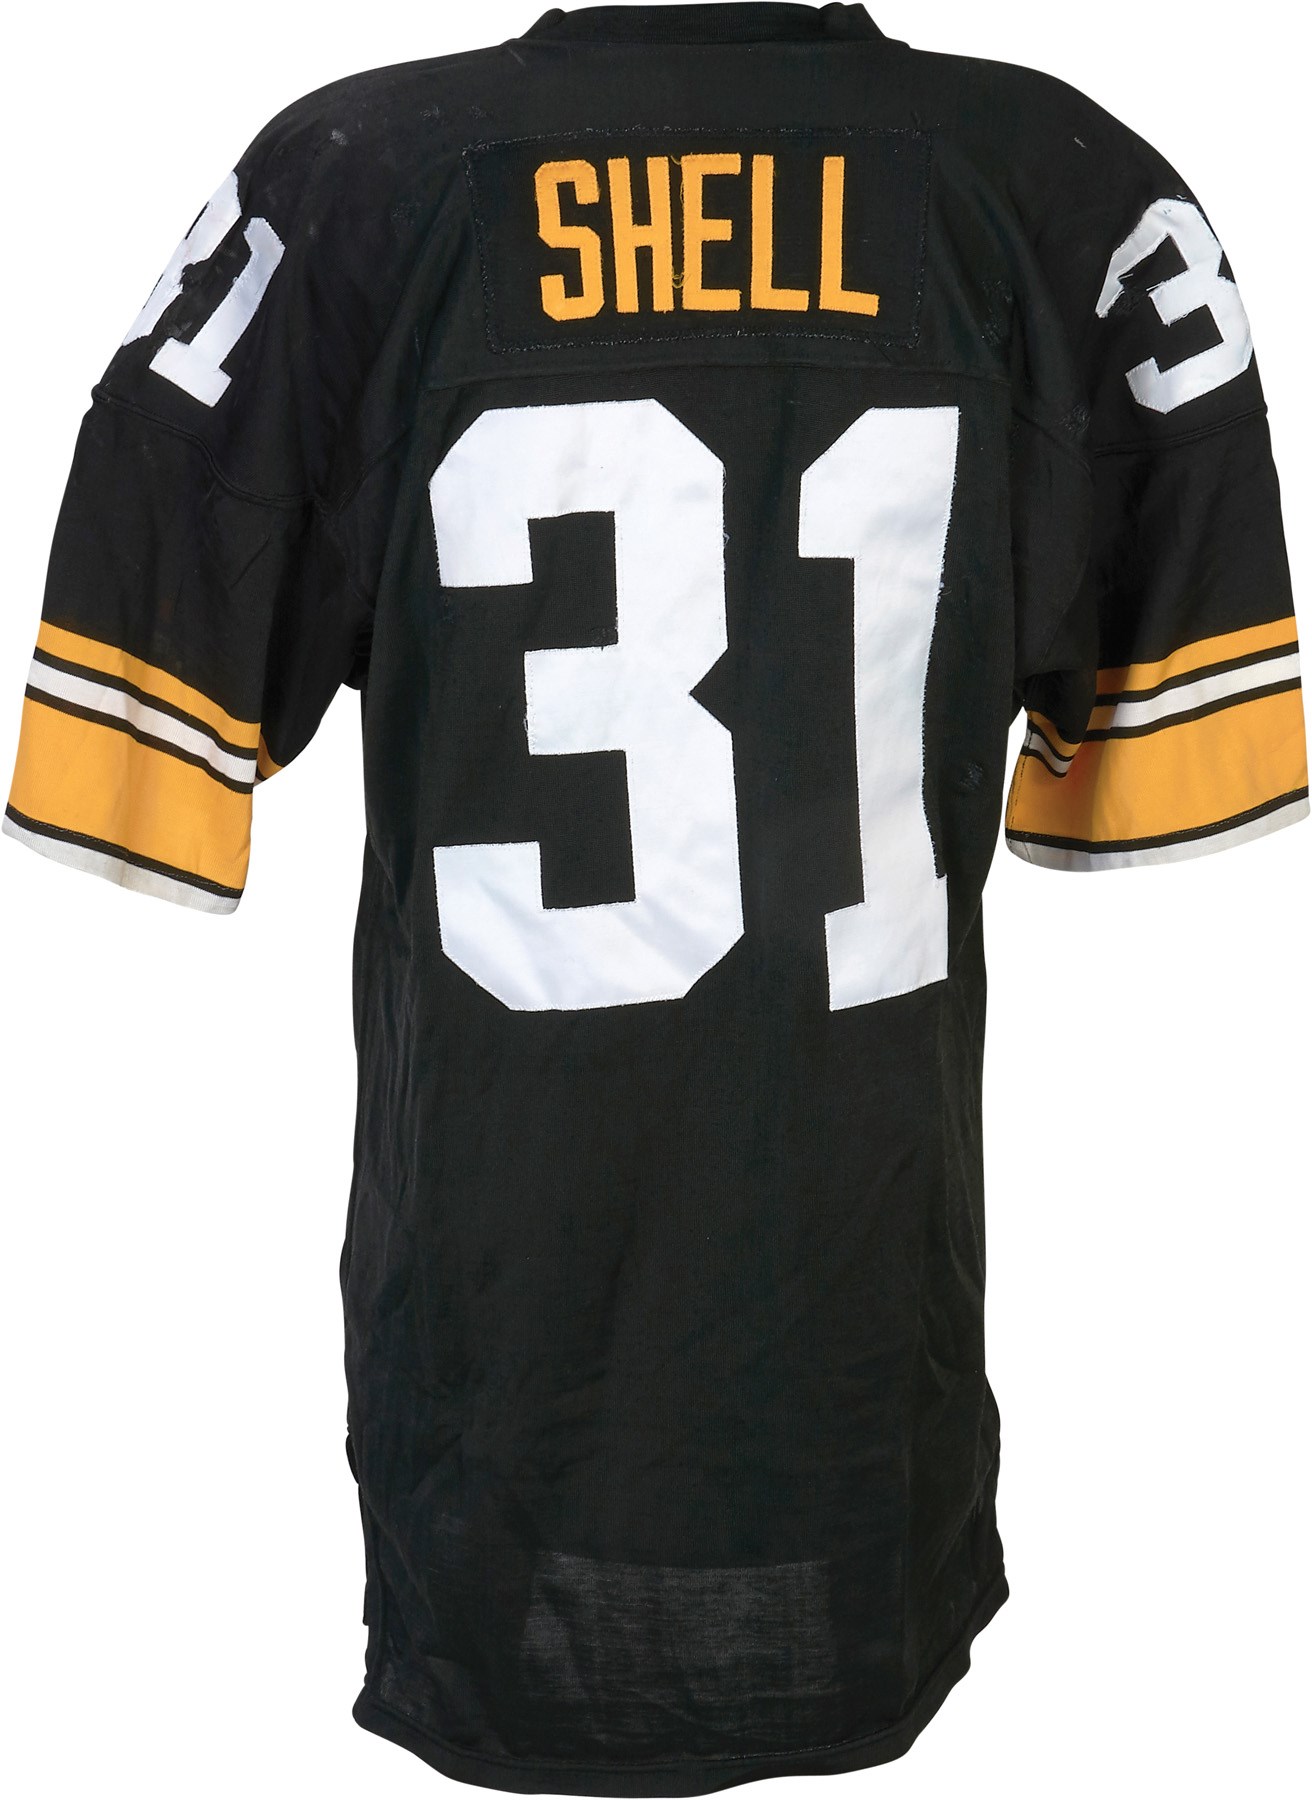 - 1985 Donnie Shell Pittsburgh Steelers Game Worn Jersey (Photo-Matched)